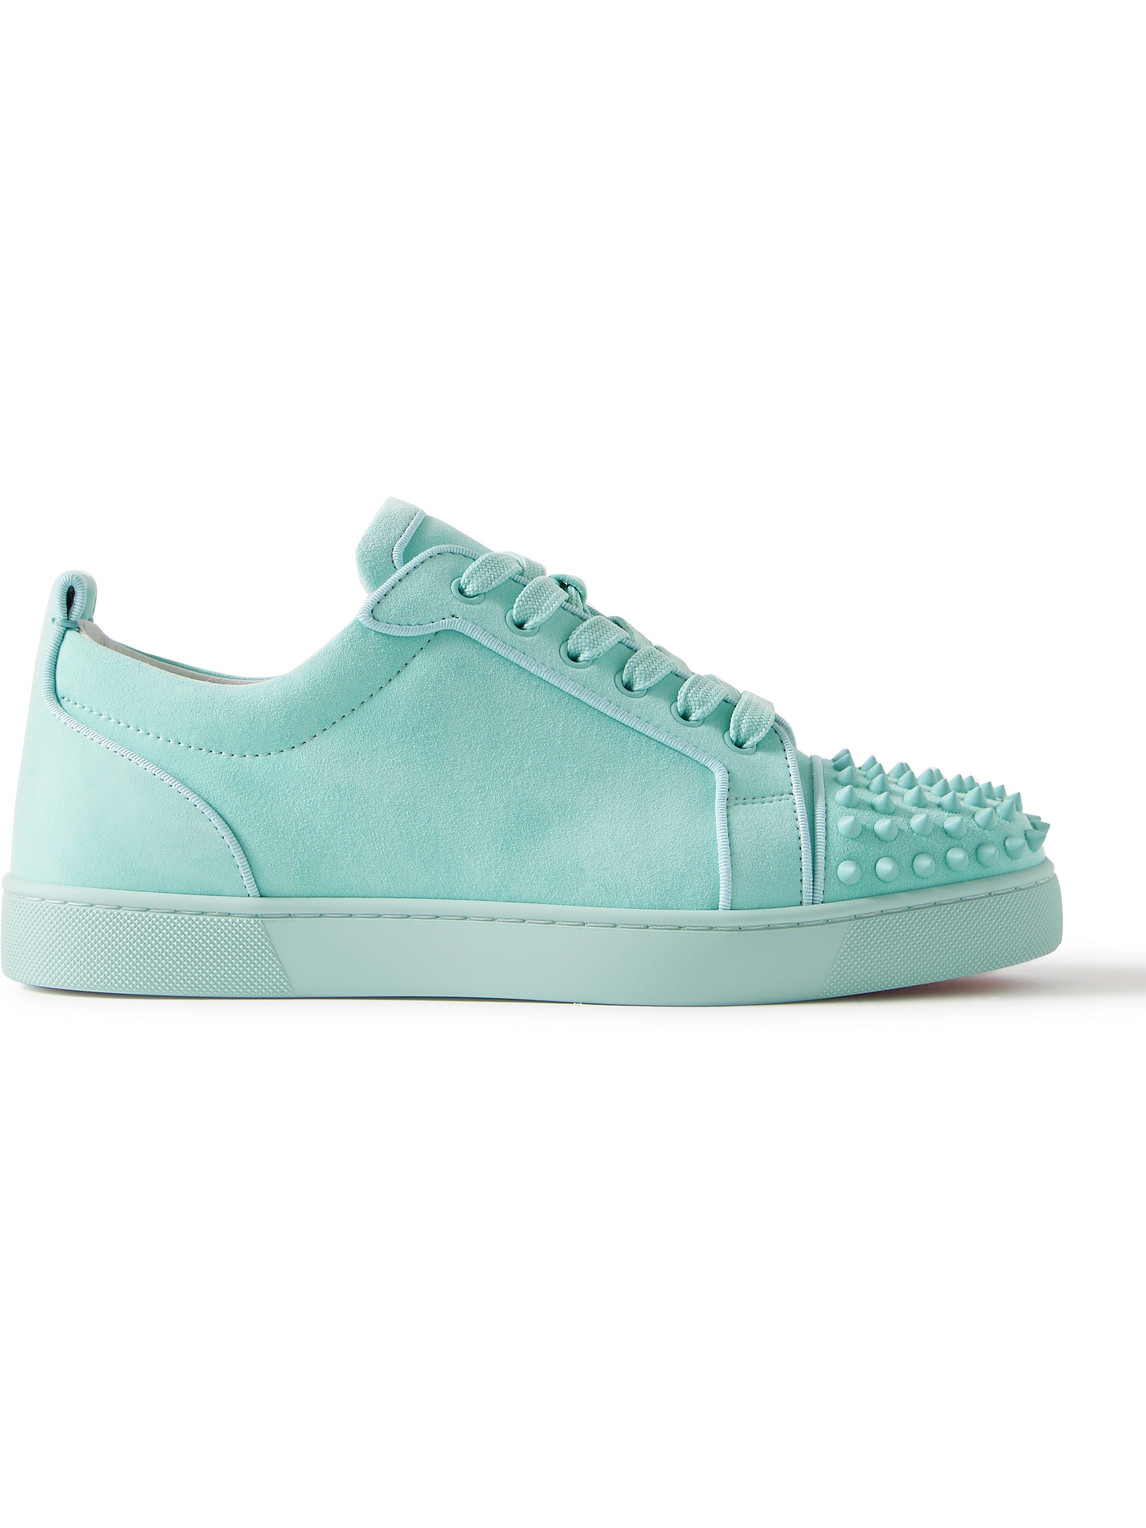 Christian Louboutin Louis Junior Spiked Suede Sneakers In Blue